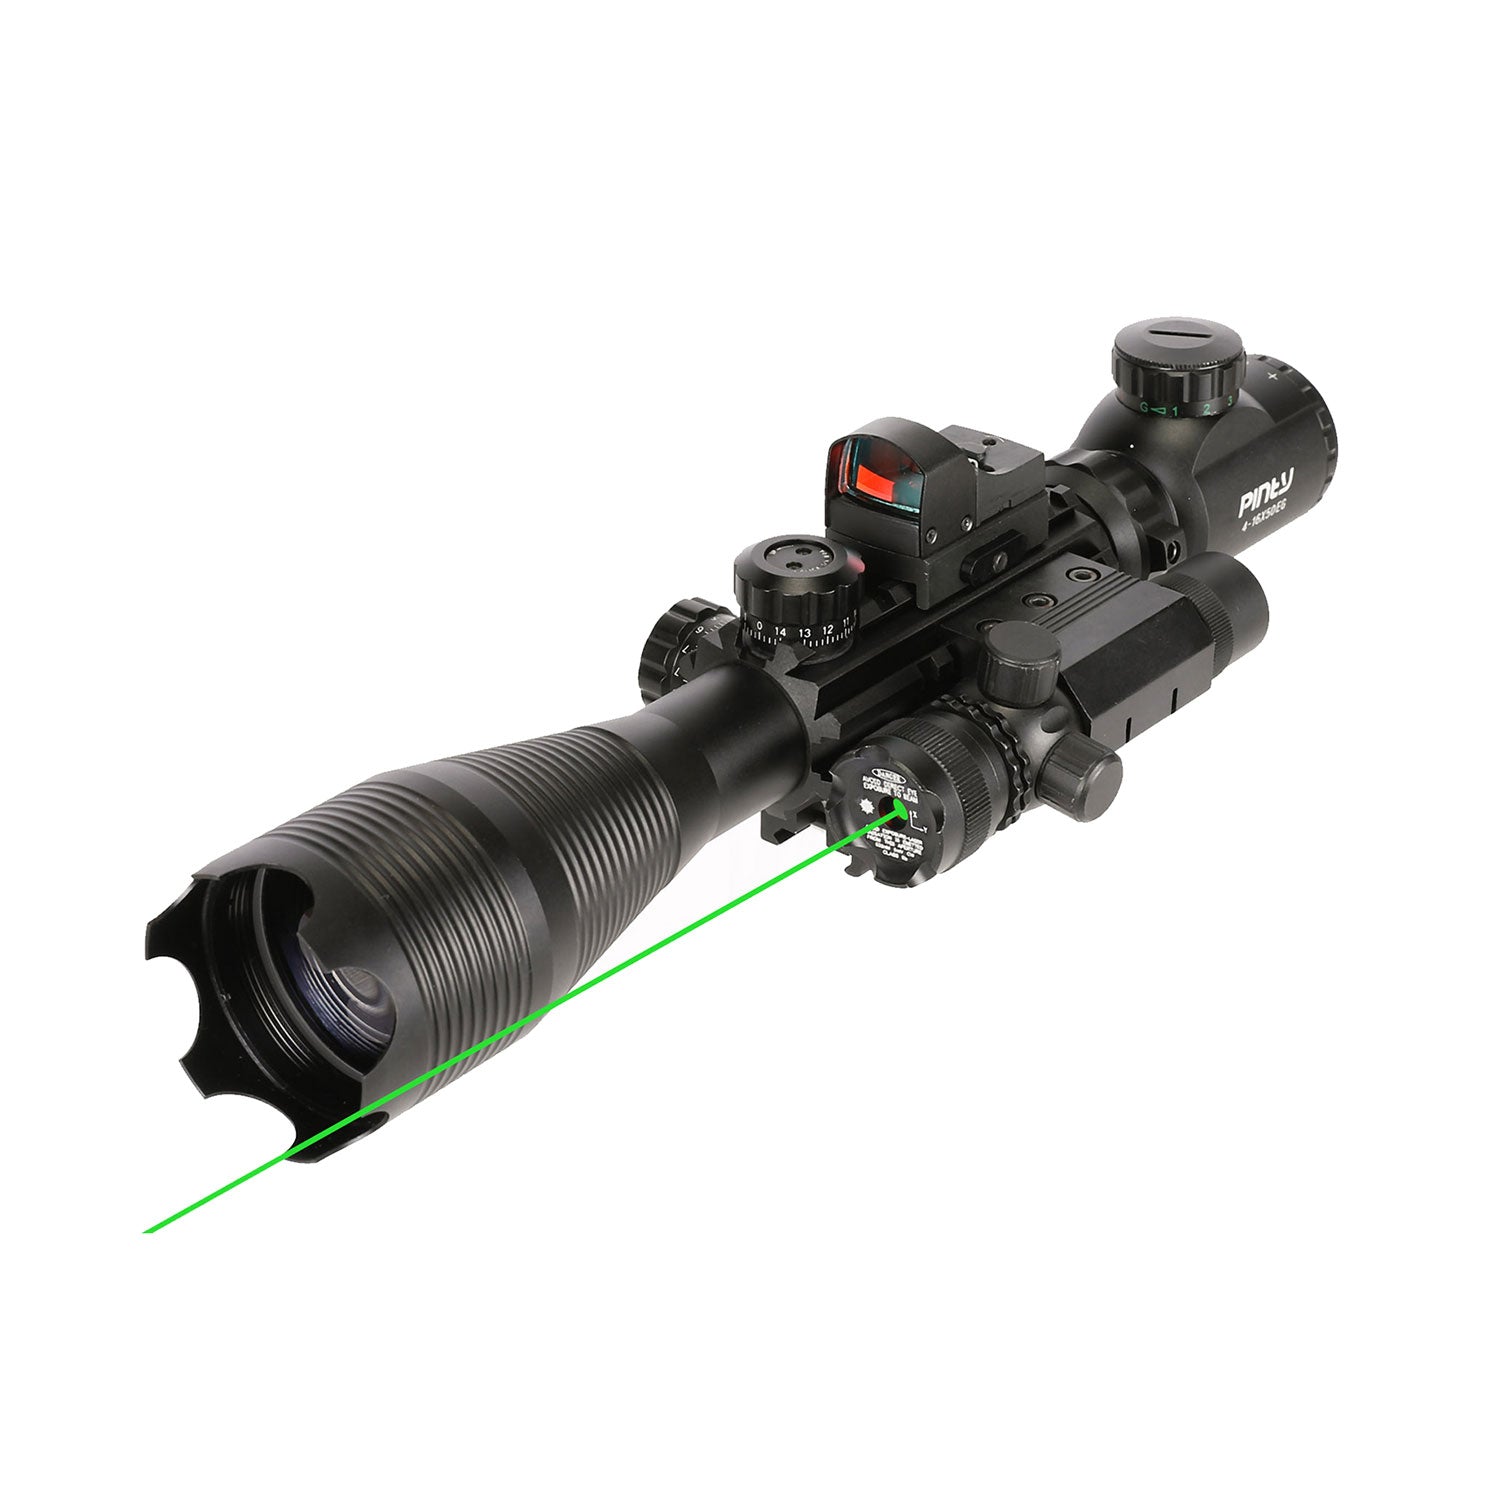 4-in-1 Rifle Scope Combo, 4-16*50mm Rangefinder Scope, Green Laser, Red Dot Sight, Boresighter